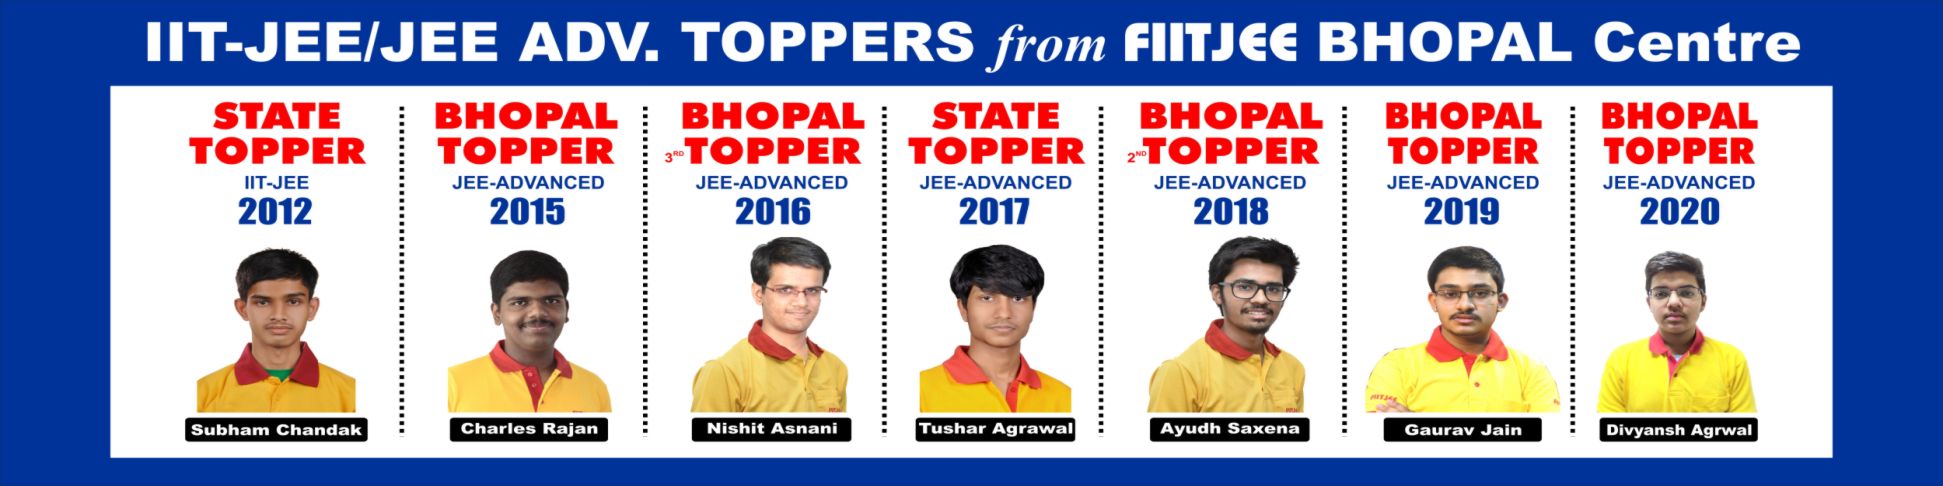 IIT JEE and JEE Adv Toppers